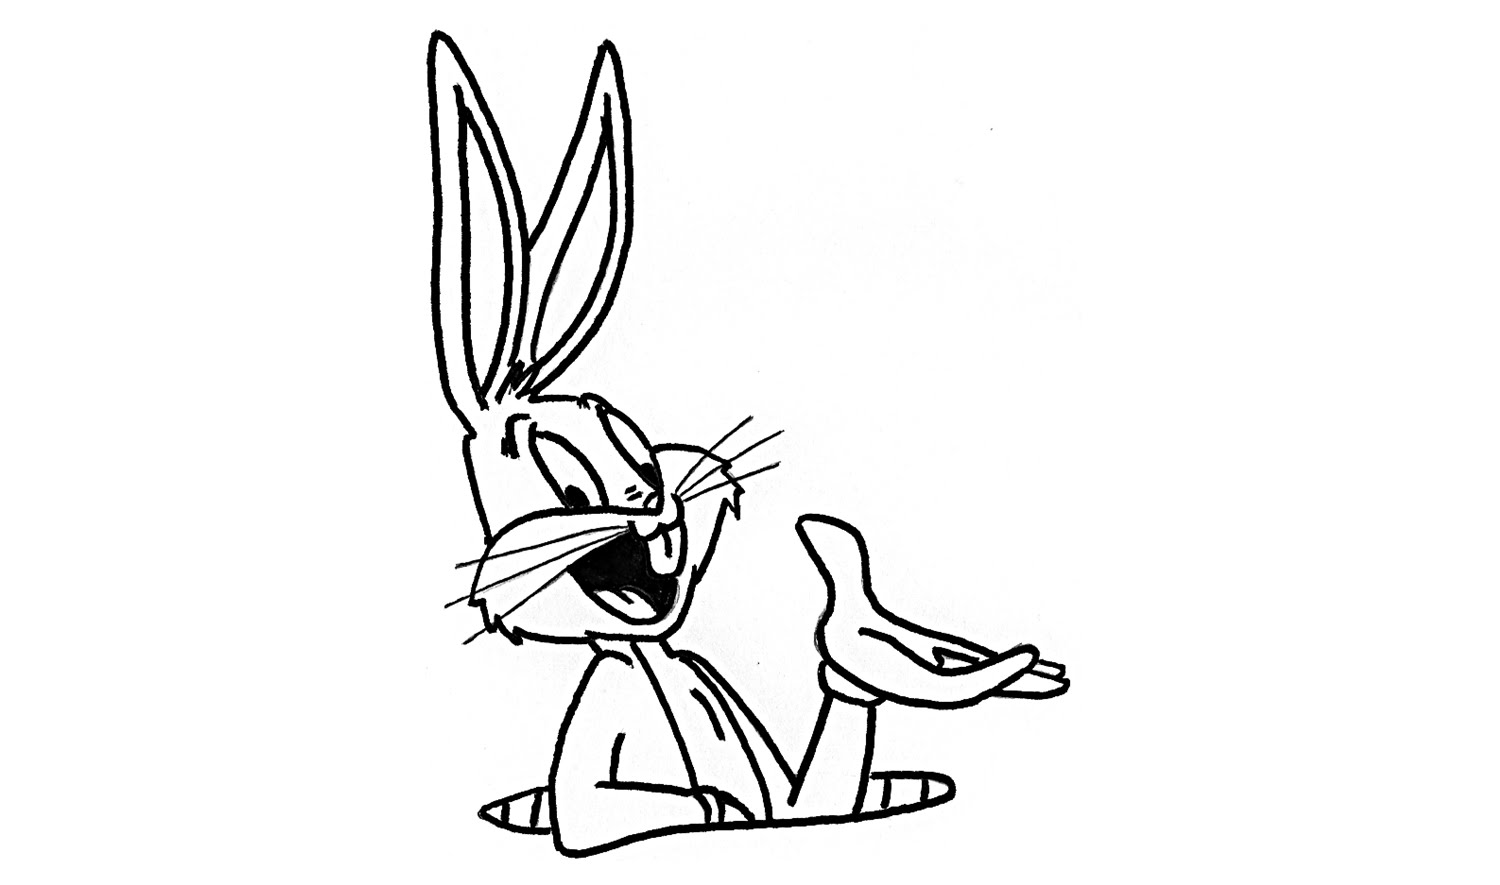 How to Draw Bugs Bunny from Looney Tunes - YouTube